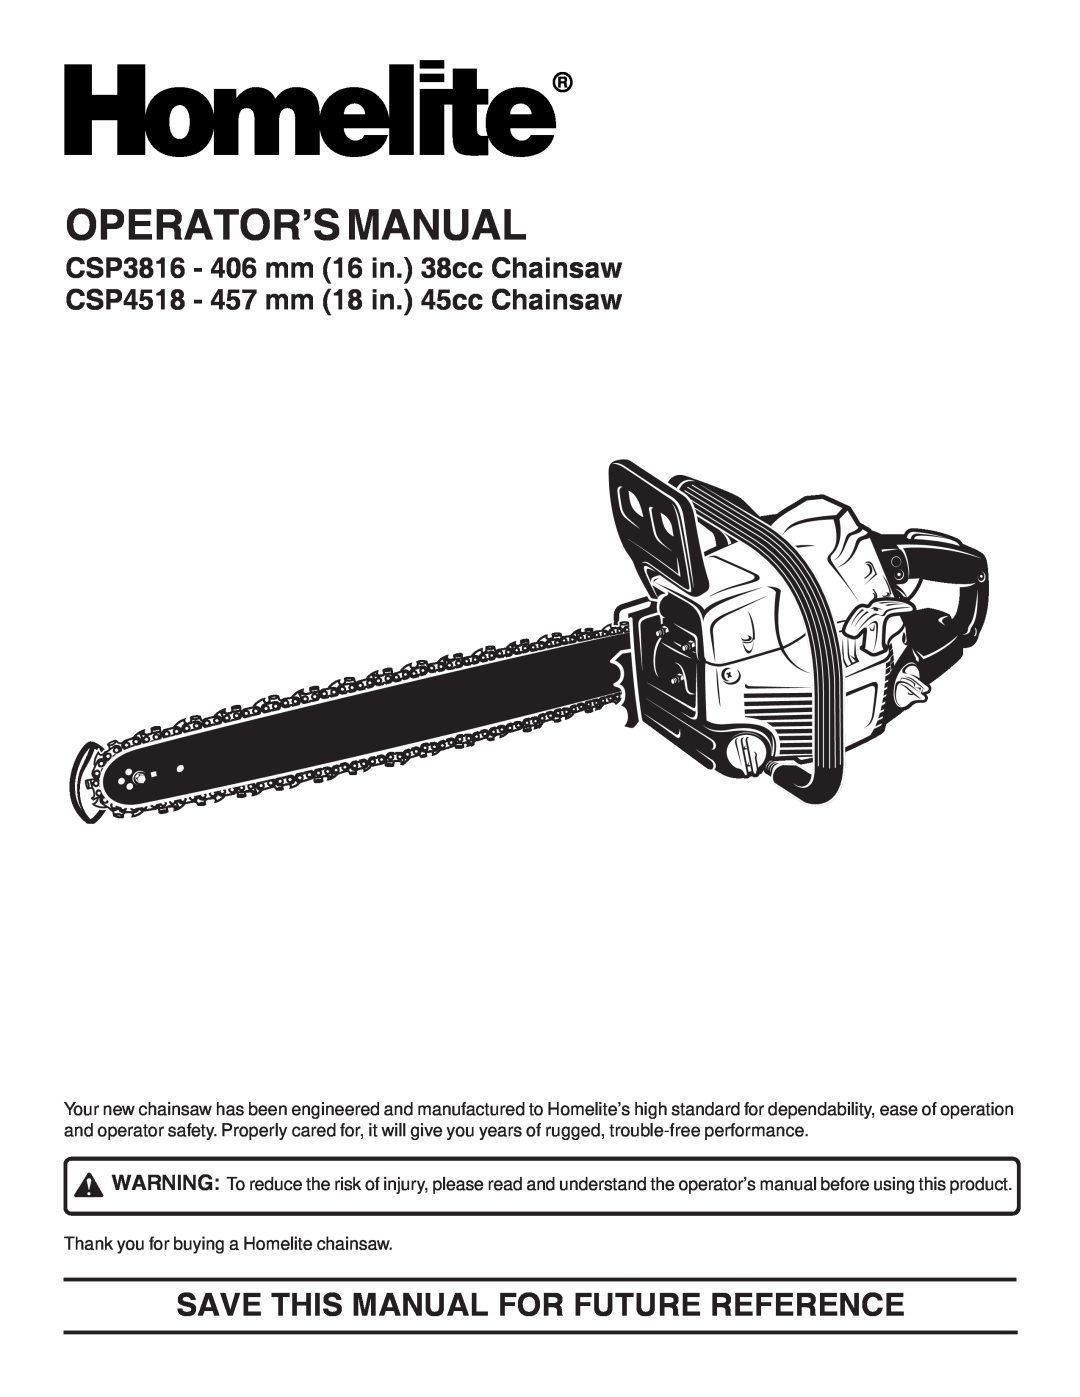 Homelite CSP4518 manual Operator’S Manual, Save This Manual For Future Reference, CSP3816 - 406 mm 16 in. 38cc Chainsaw 